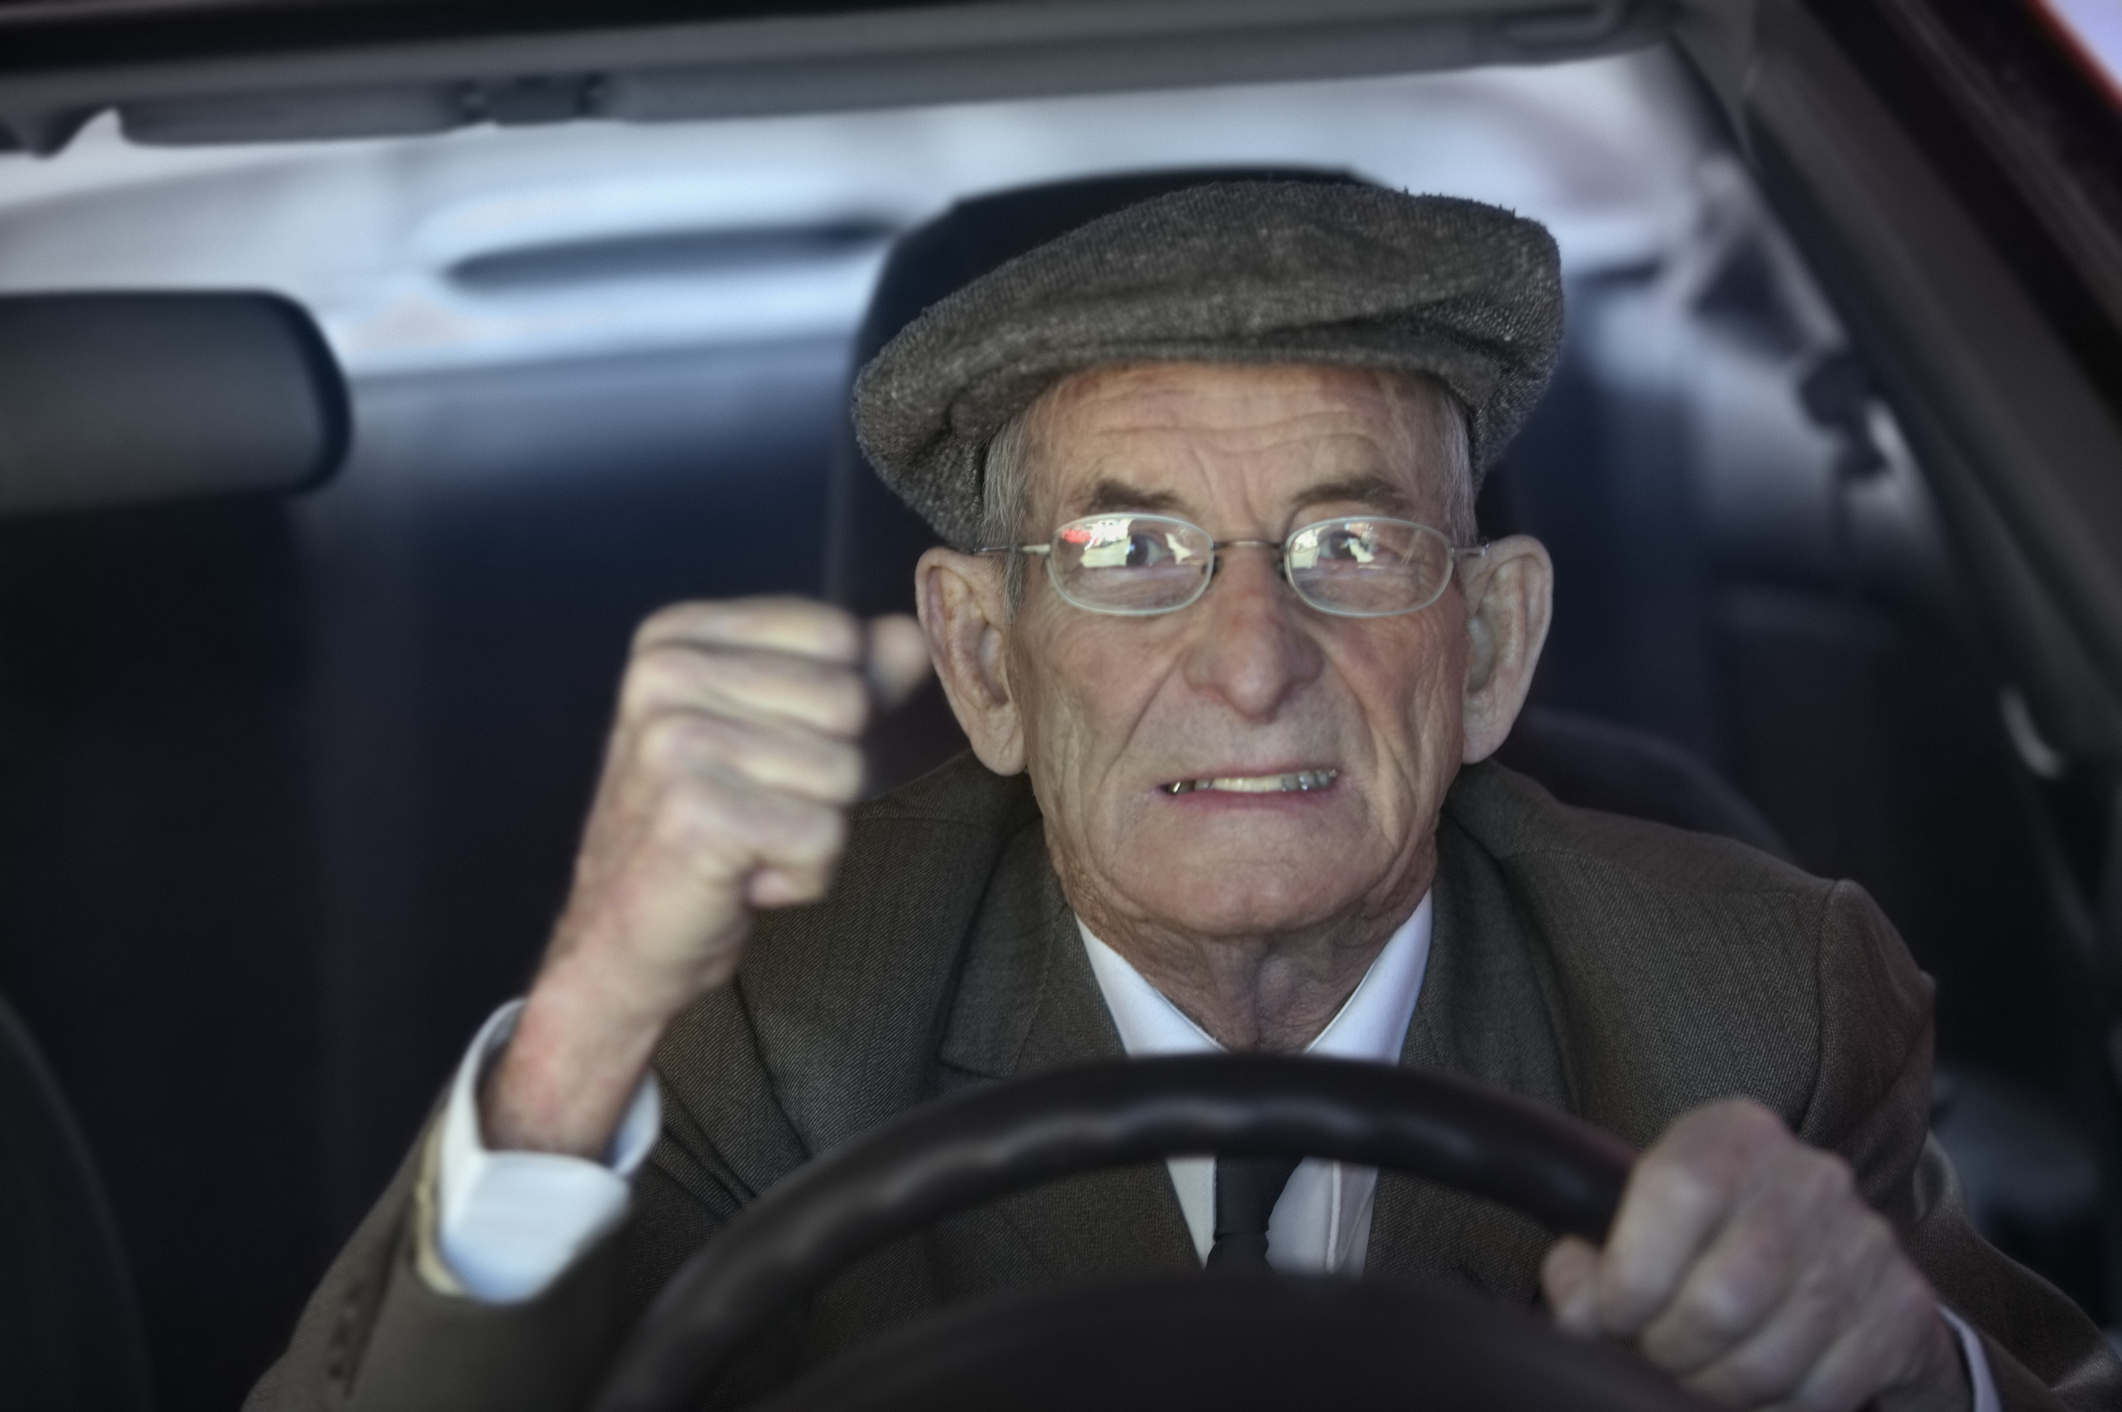 Older man in flat cap driving a car, looking forward through the windshield, his fist raised in determination